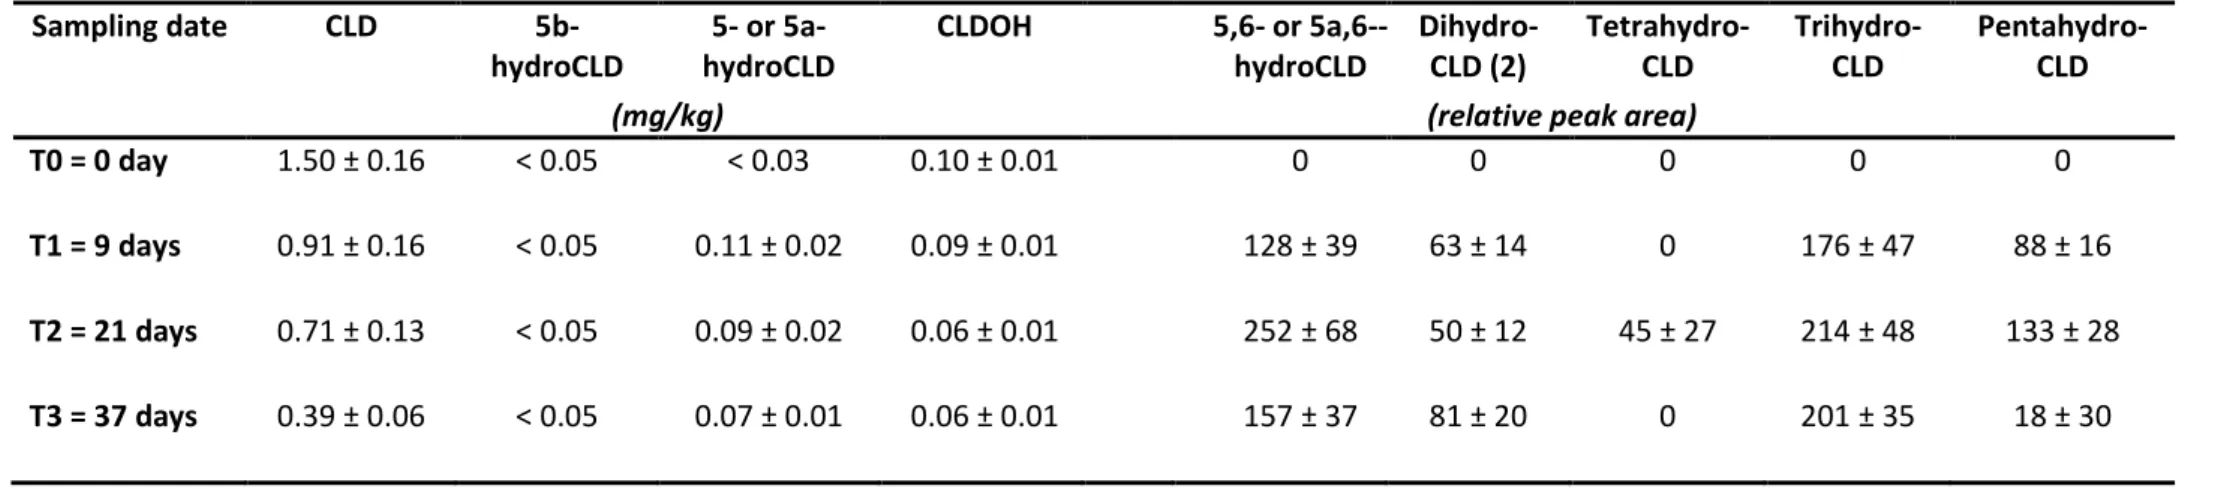 Table 7   Sampling date  CLD   5b-hydroCLD  5- or  5a-hydroCLD  CLDOH  5,6- or 5a,6--hydroCLD  Dihydro-CLD (2)  Tetrahydro-CLD  Trihydro-CLD  Pentahydro-CLD 